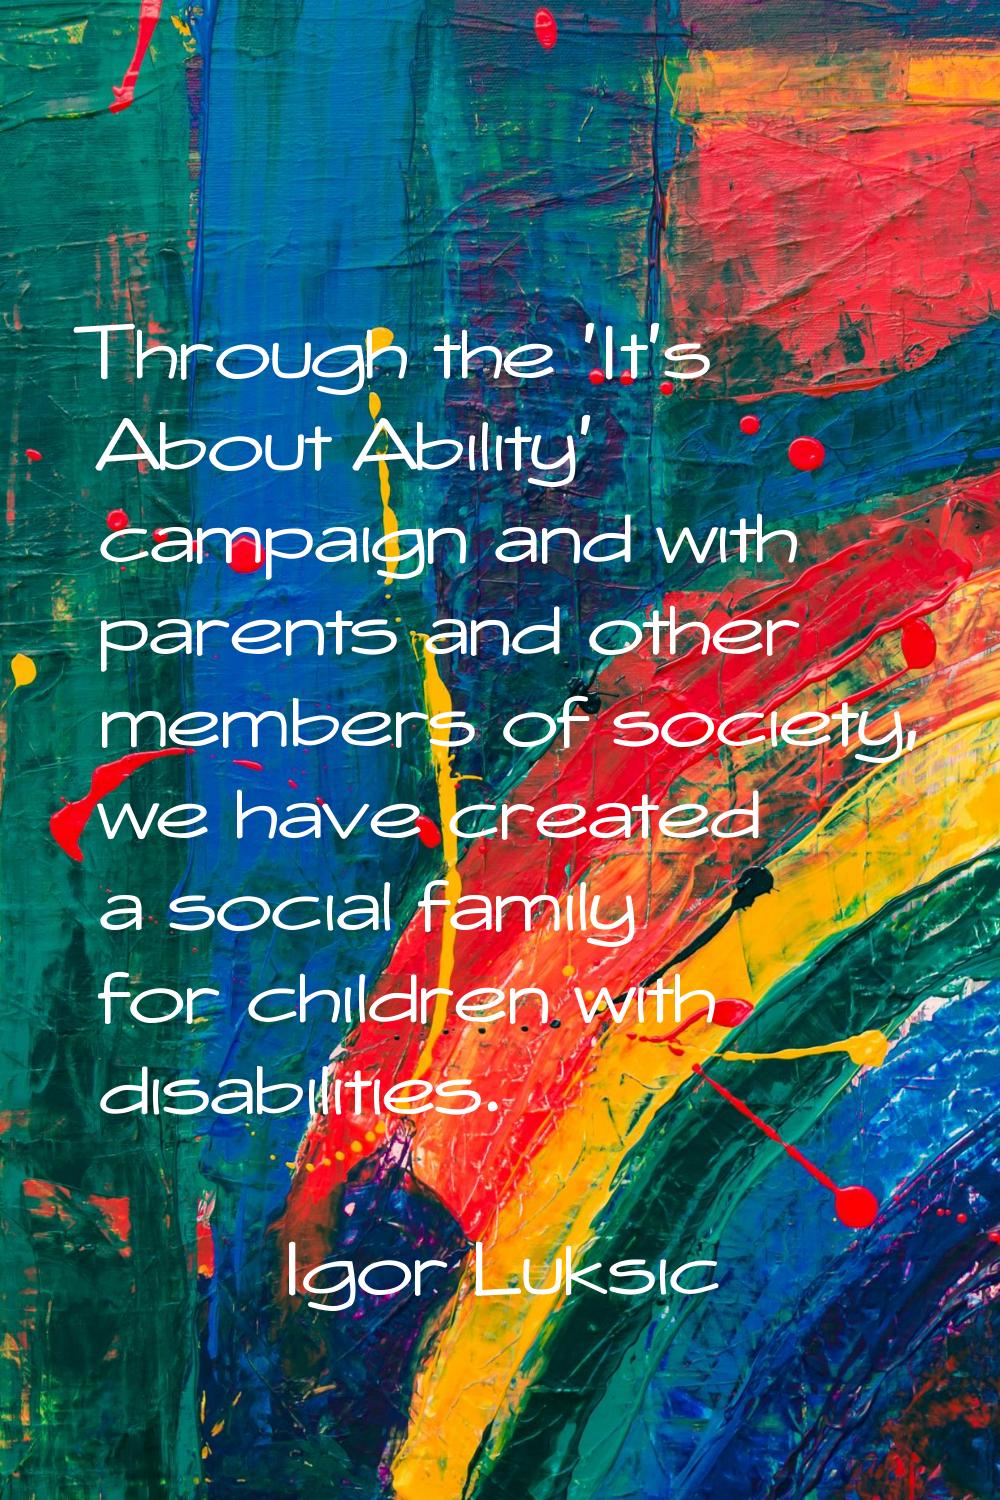 Through the 'It's About Ability' campaign and with parents and other members of society, we have cr